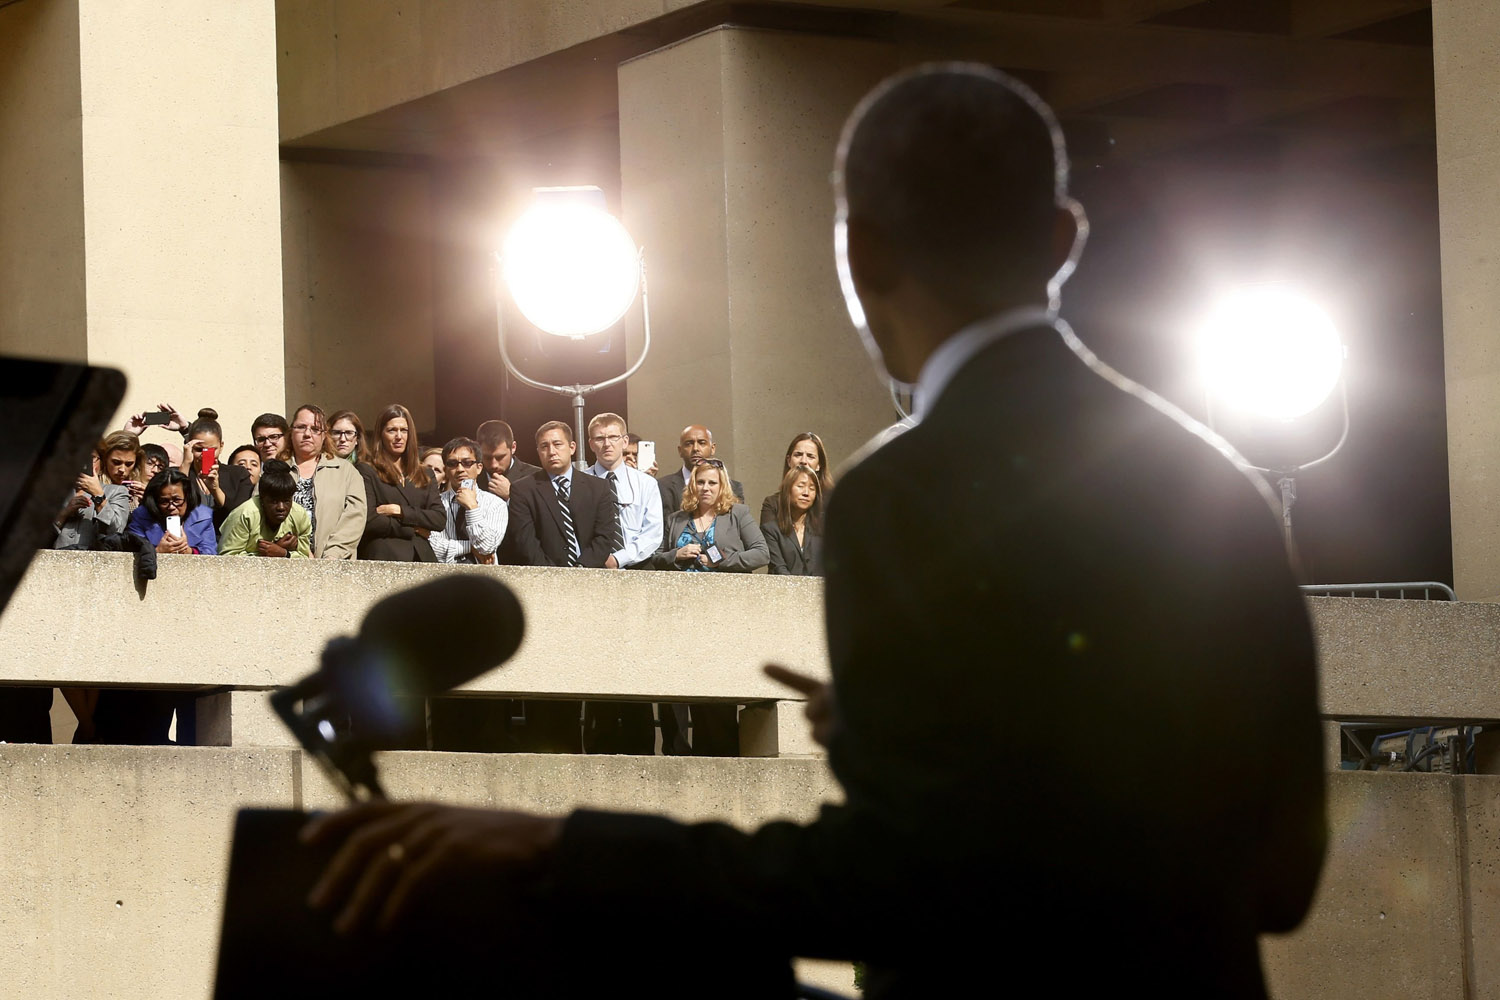 Oct. 28, 2013. FBI employees listen as U.S. President Barack Obama speaks during the inauguration ceremony for new FBI Director James Comey (not pictured) at the FBI Headquarters in Washington.